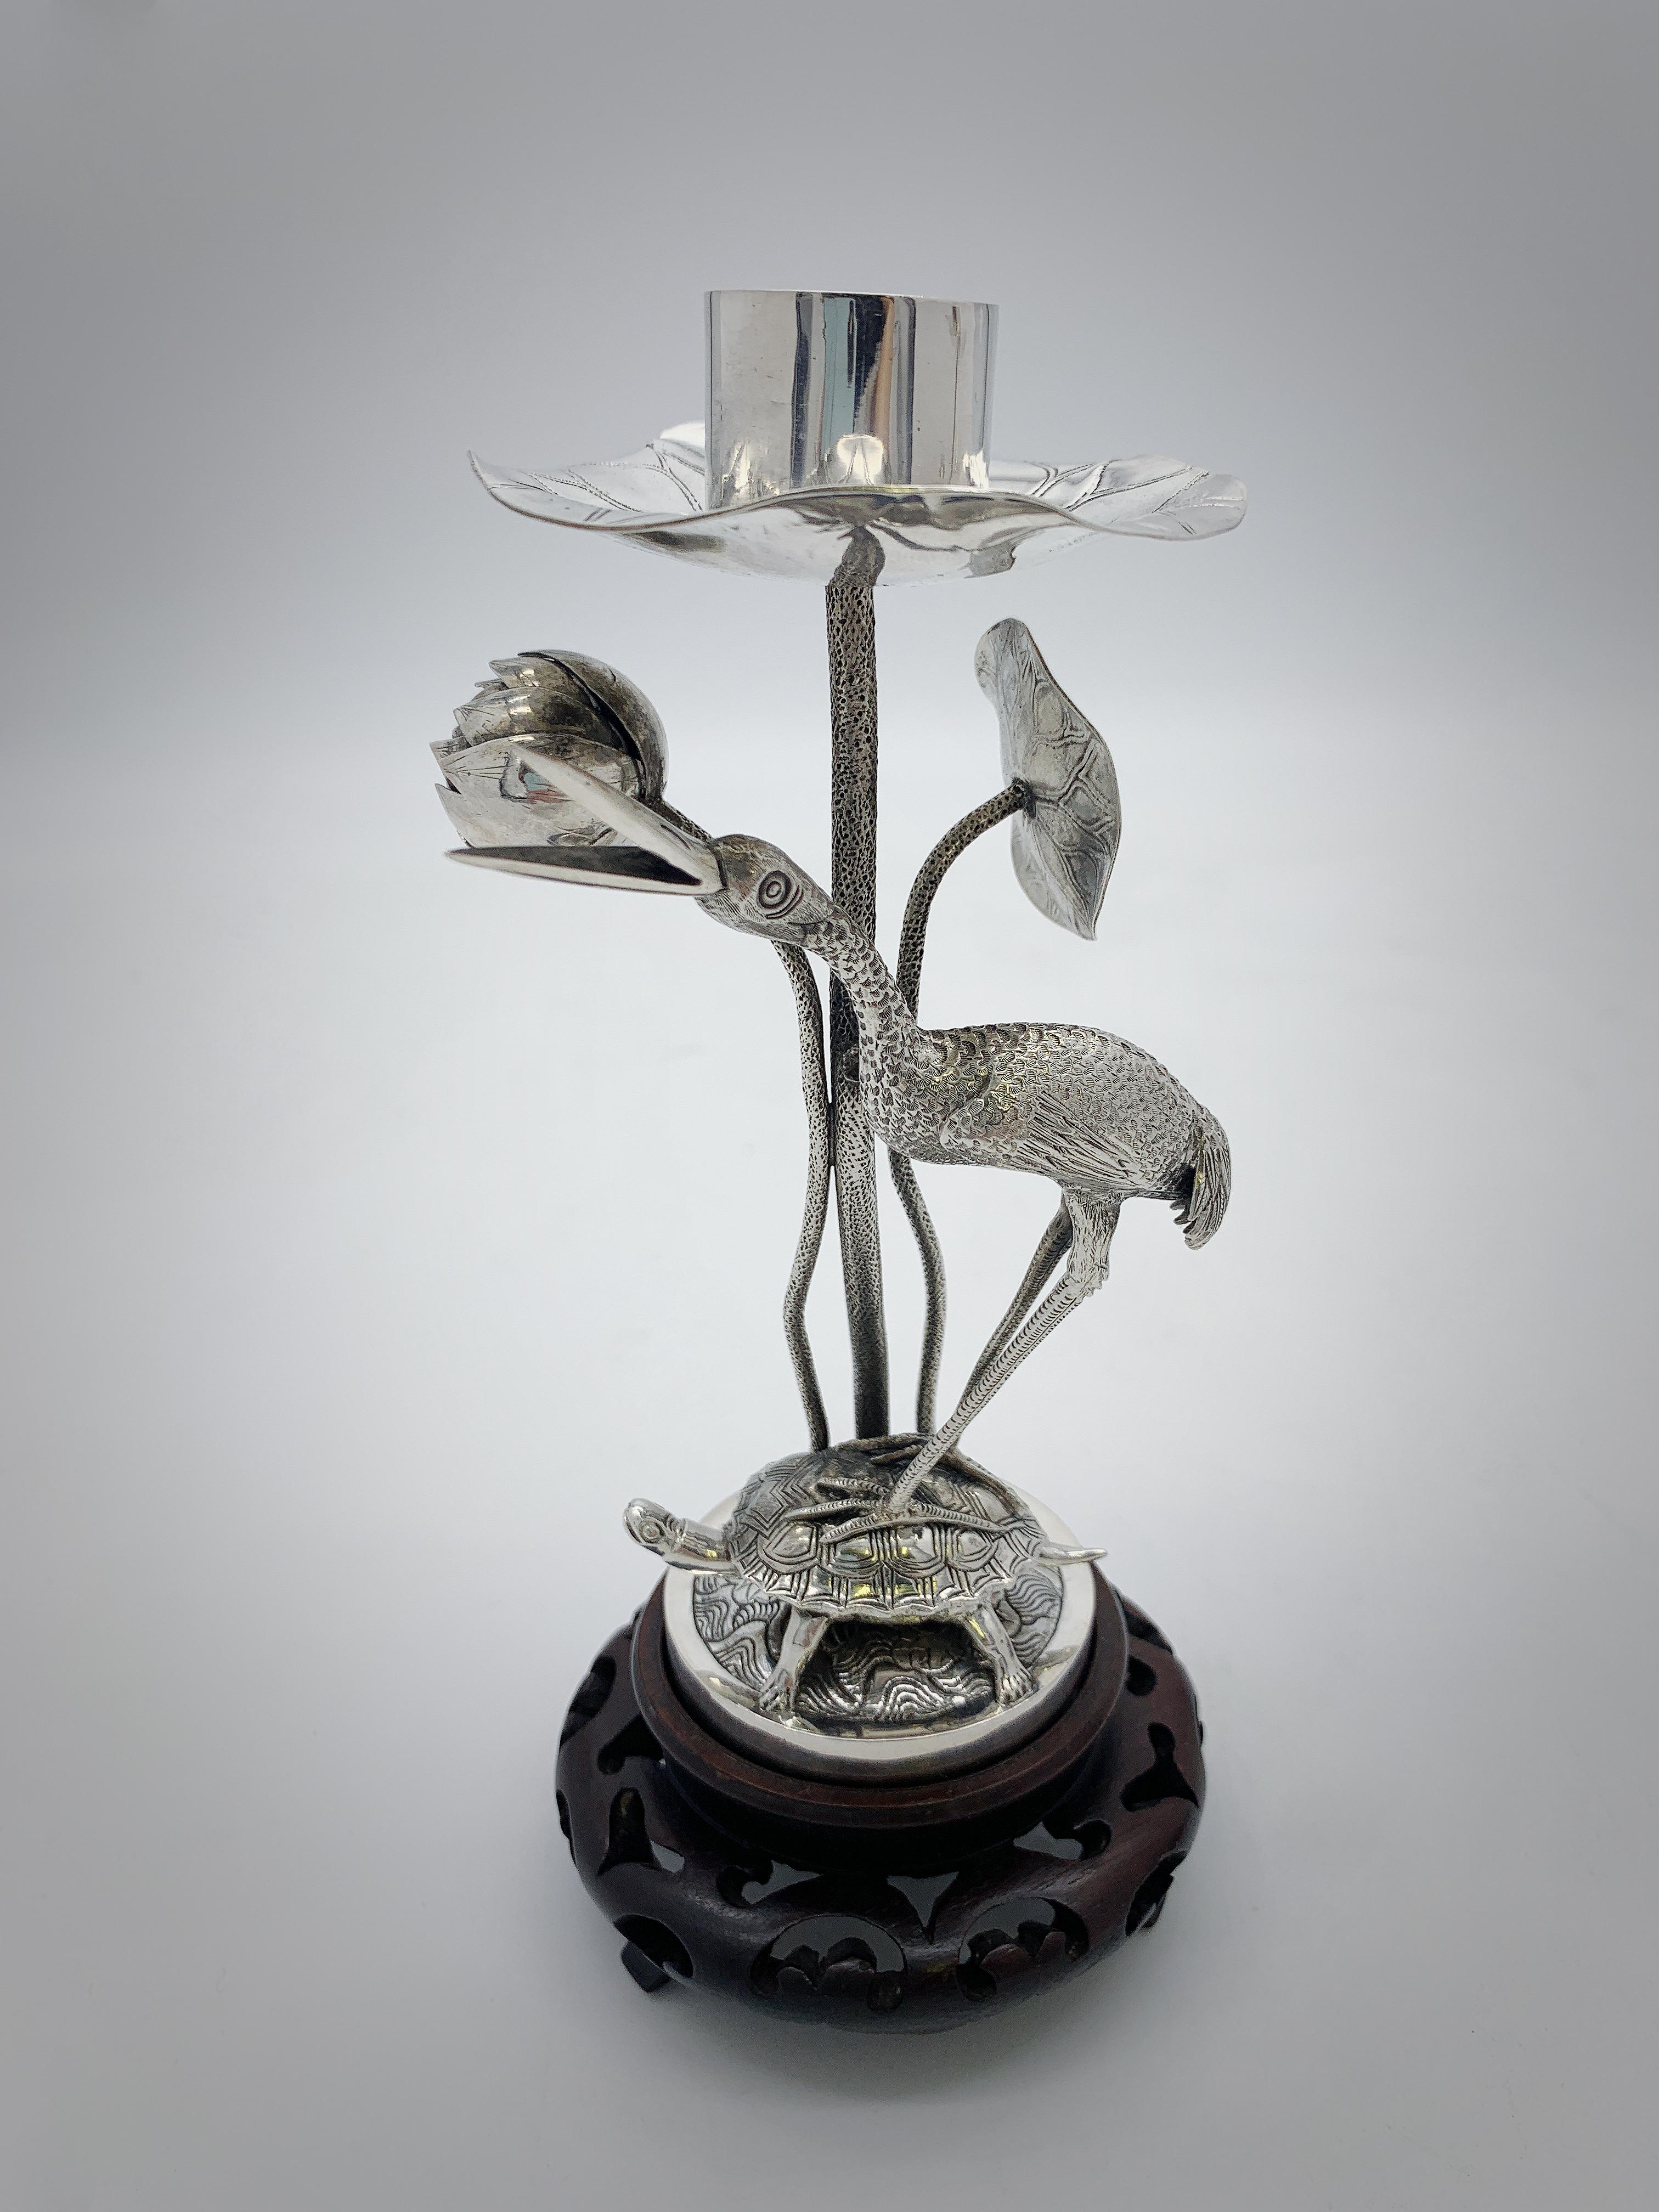 A pair of Chinese export silver candlesticks each depicting crane on a tortoise. Crane and tortoise are the symbol of immortality, happiness and longevity in Chinese mythology. The crane also used as a symbol of high position of power and life full